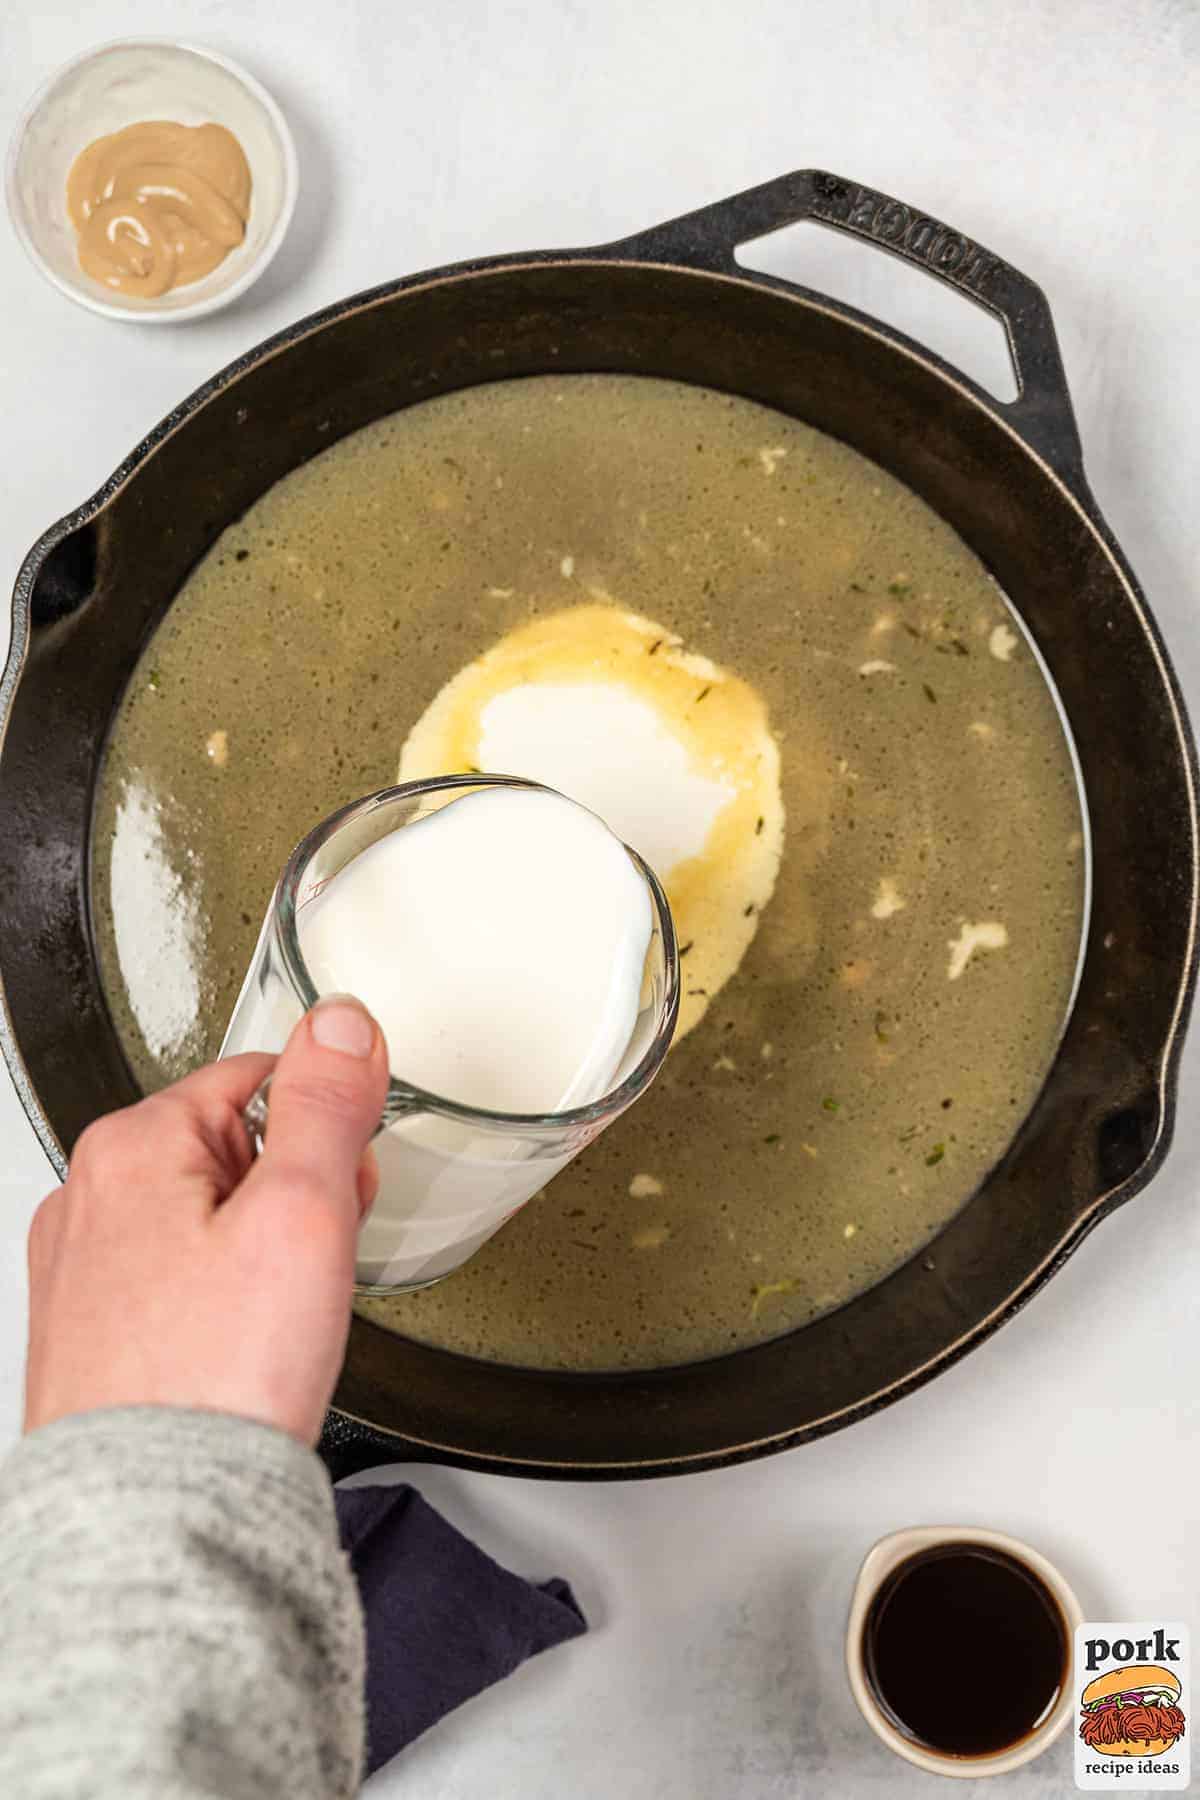 the cream being poured into the pan of chicken stock and drippings